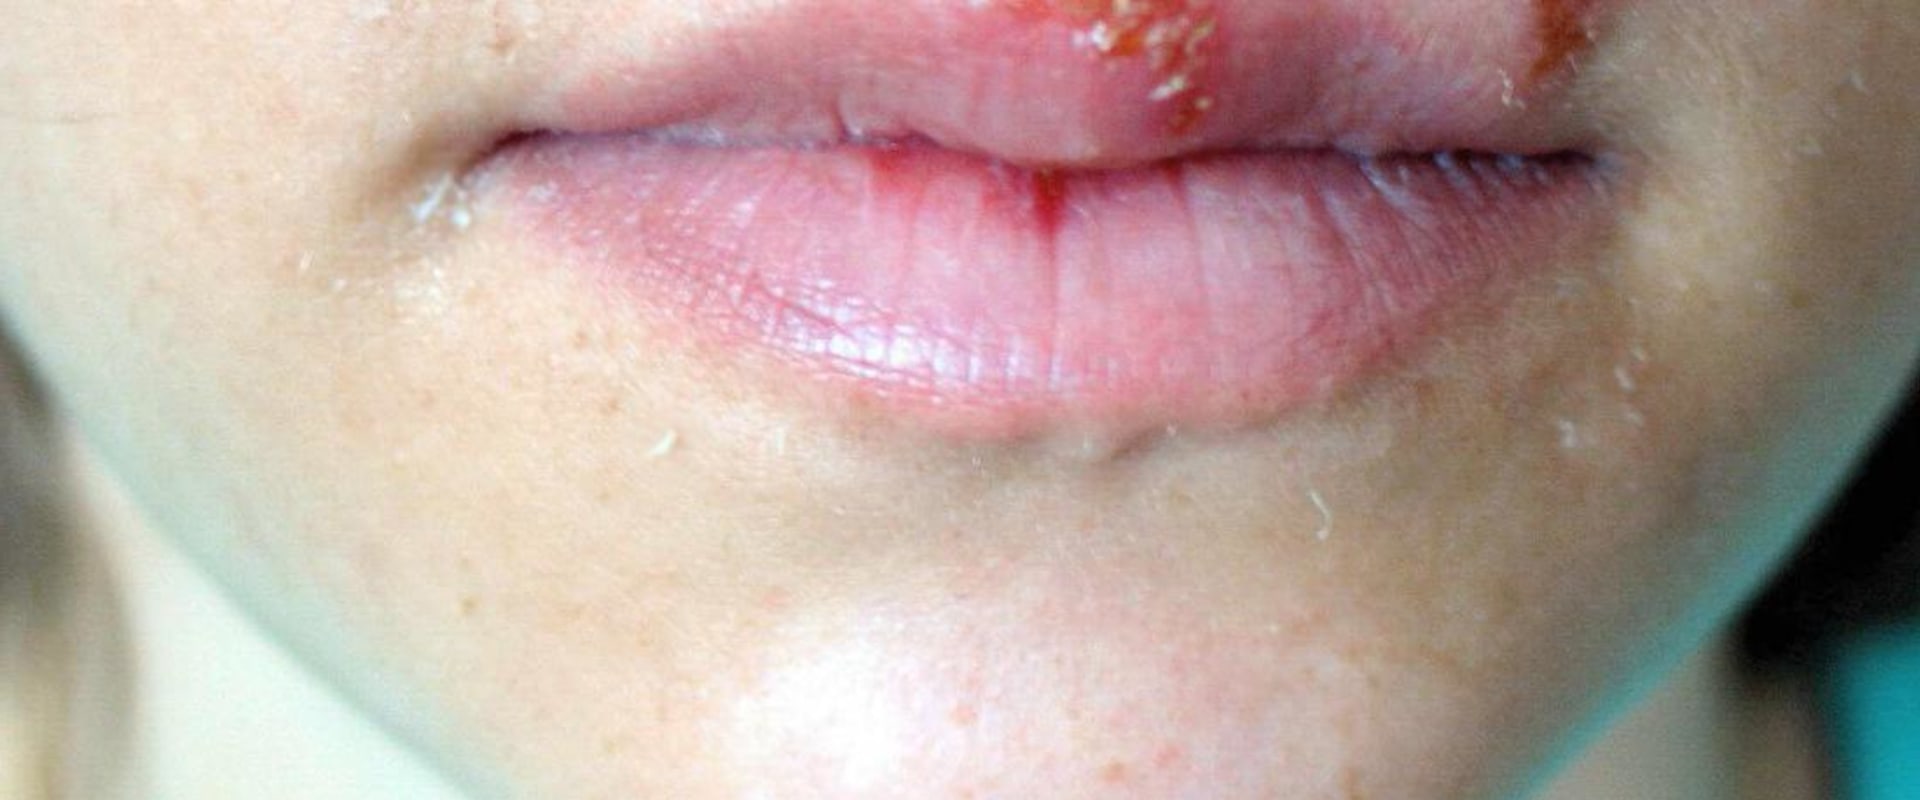 Is Herpes Curable on the Mouth?